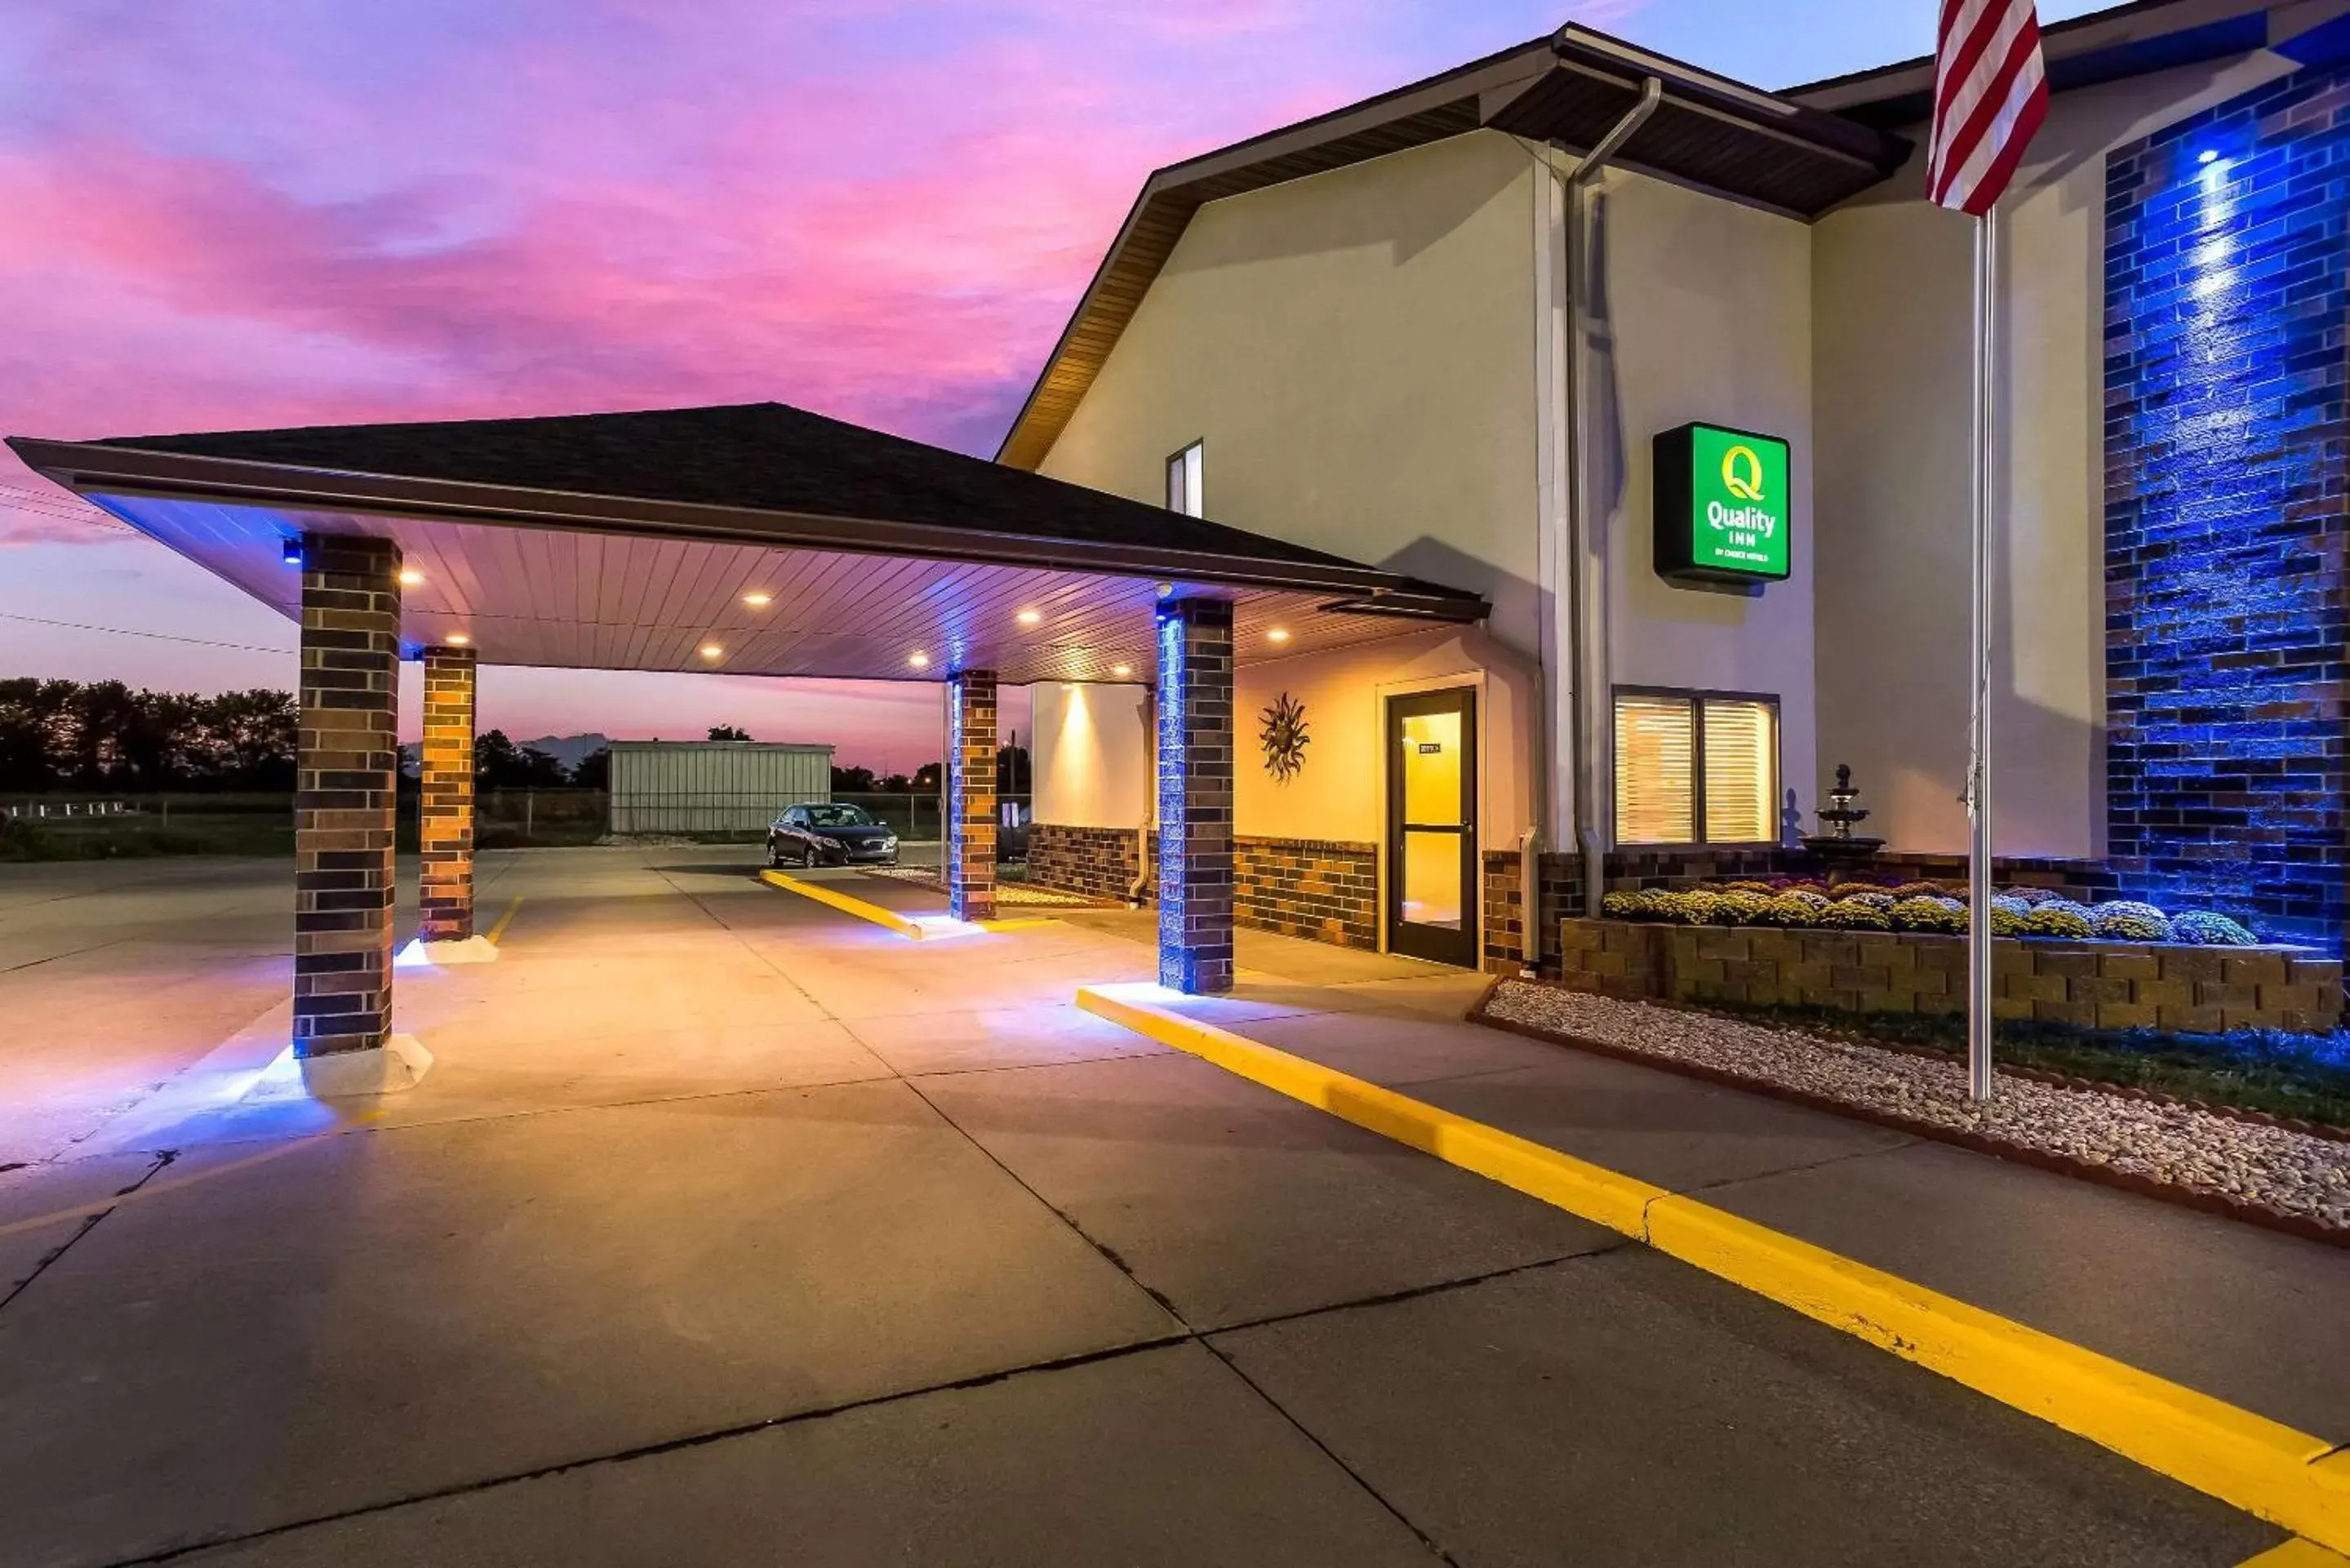 Property building in Quality Inn Galesburg near US Highway 34 and I-74